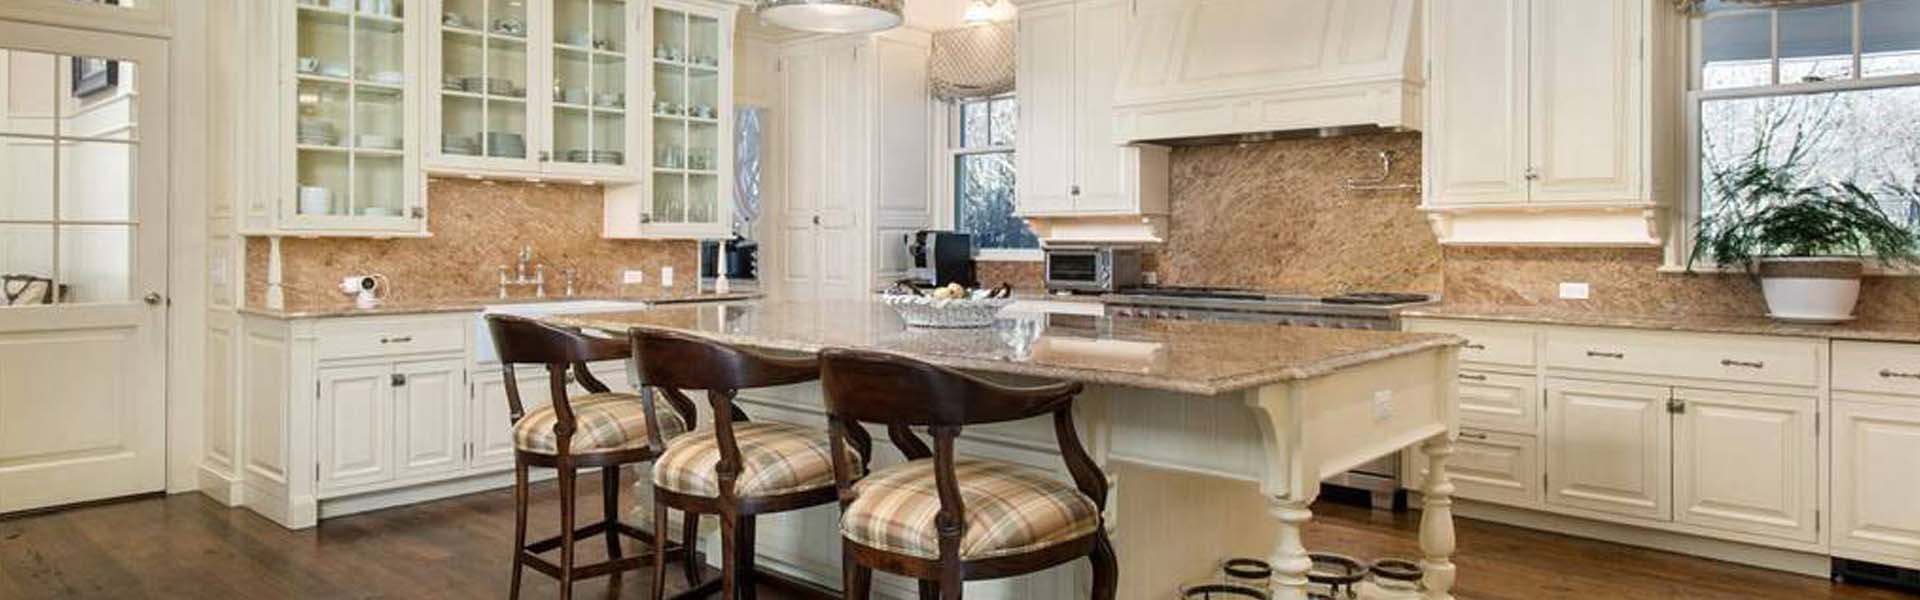 kitchen design tips top ideas for your new kitchen renovation monmouth county NJ kitchen remodel